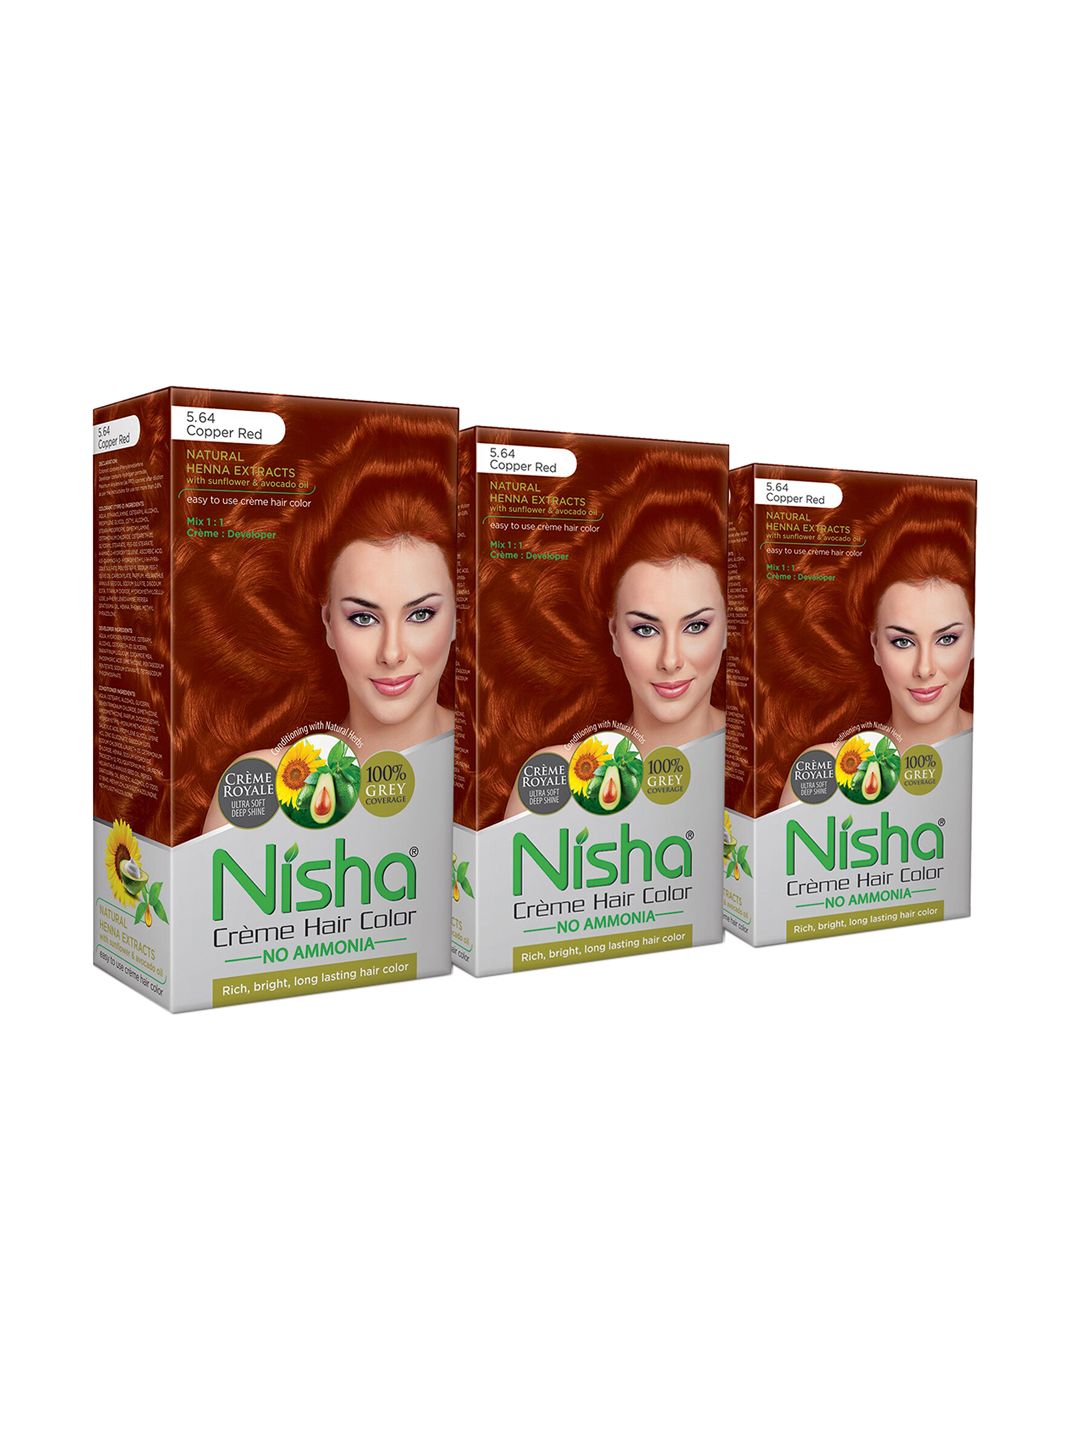 Nisha Unisex Pack of 3 Creme Hair Color 120gm each- Copper Red Price in India